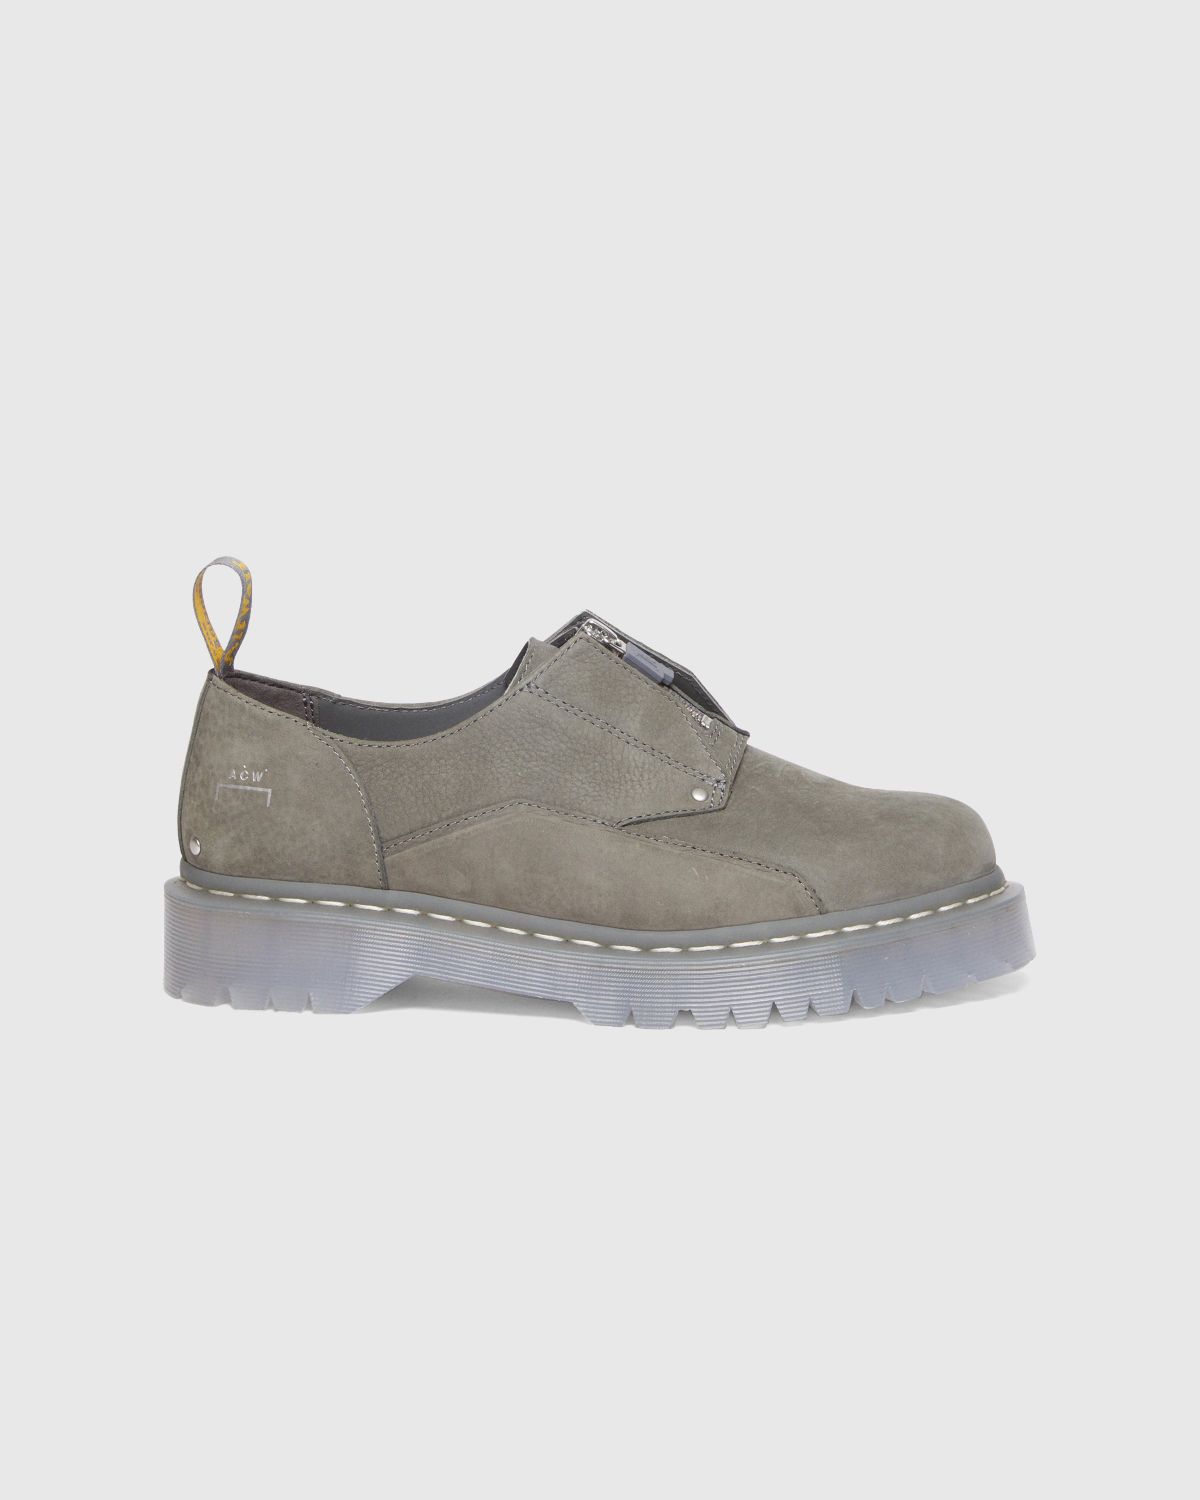 A-Cold-Wall* x Dr. Martens – 1461 BEX Low Mid Grey - Shoes - Grey - Image 1